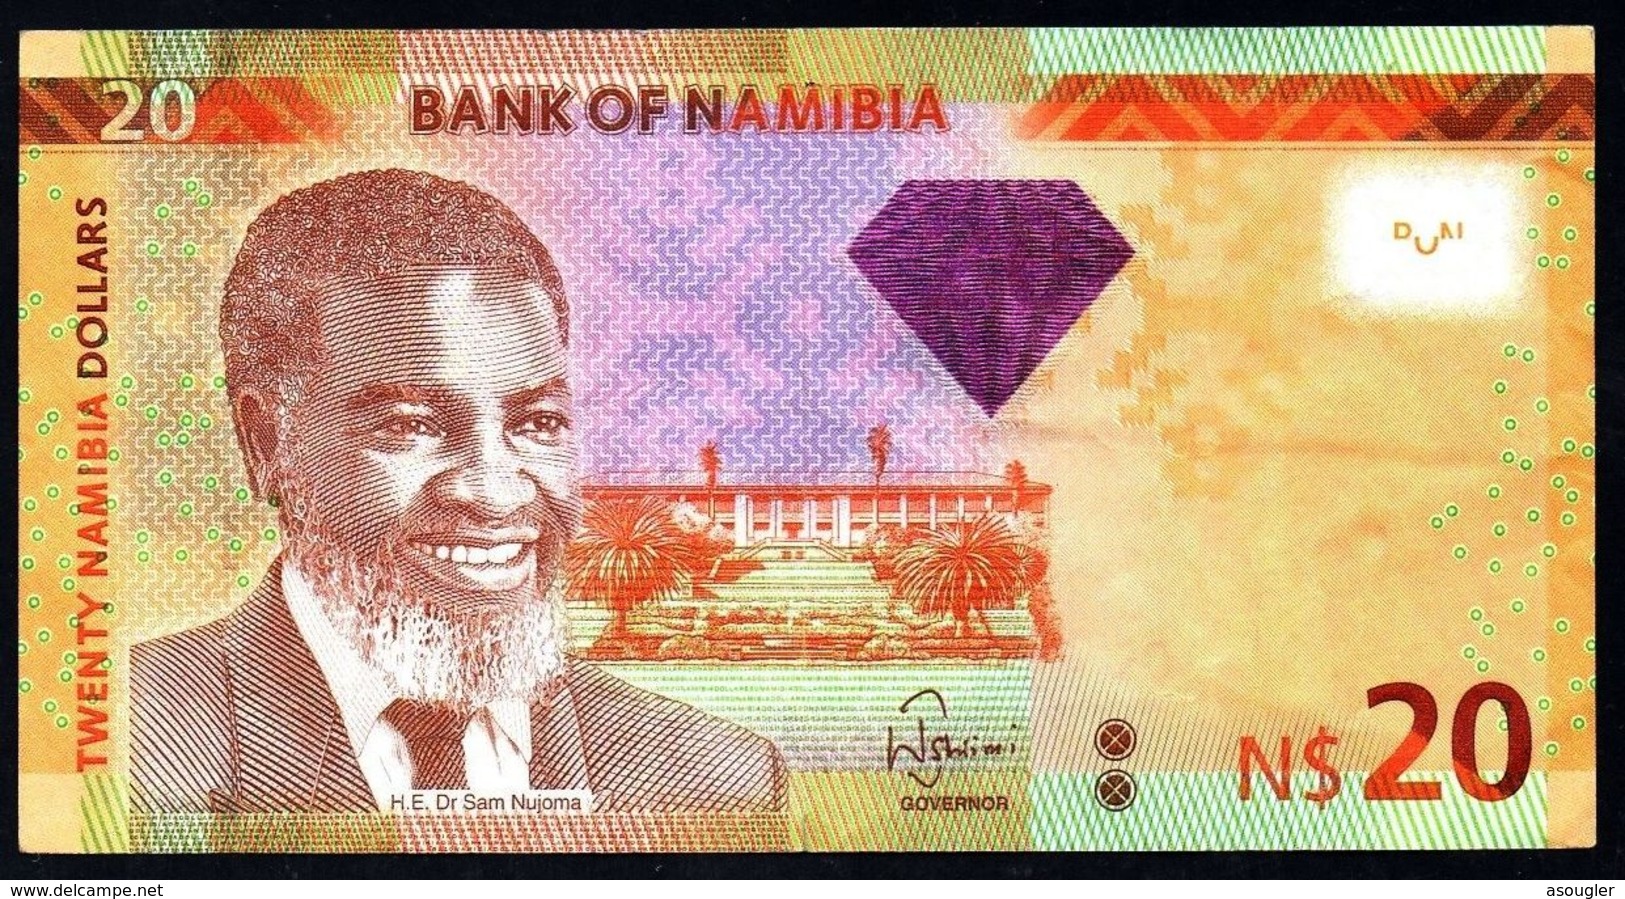 NAMIBIA 20 DOLLARS 2013 VF Free Sipping Via Regular Air Mail (buyer Risk) - Namibia